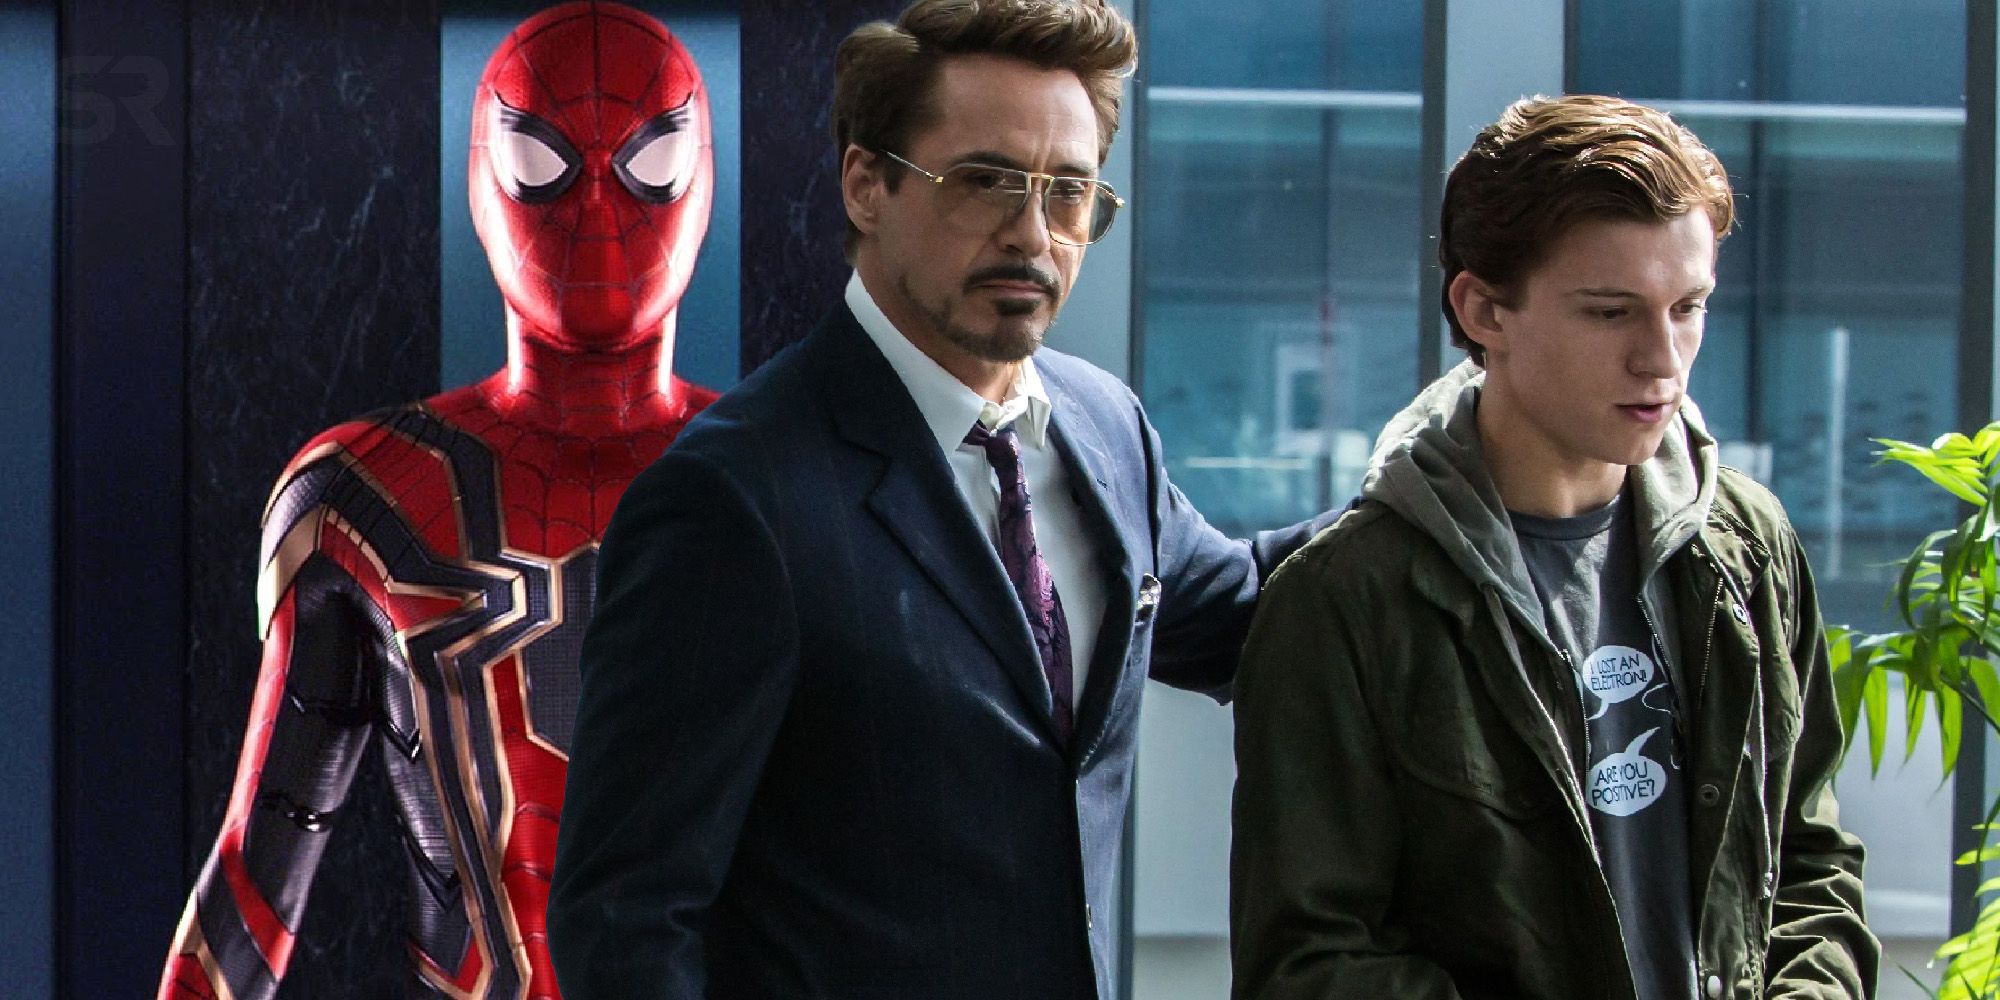 Tony Stark’s Homecoming Plan Would Have Caused Spider-Man’s Identity Twist